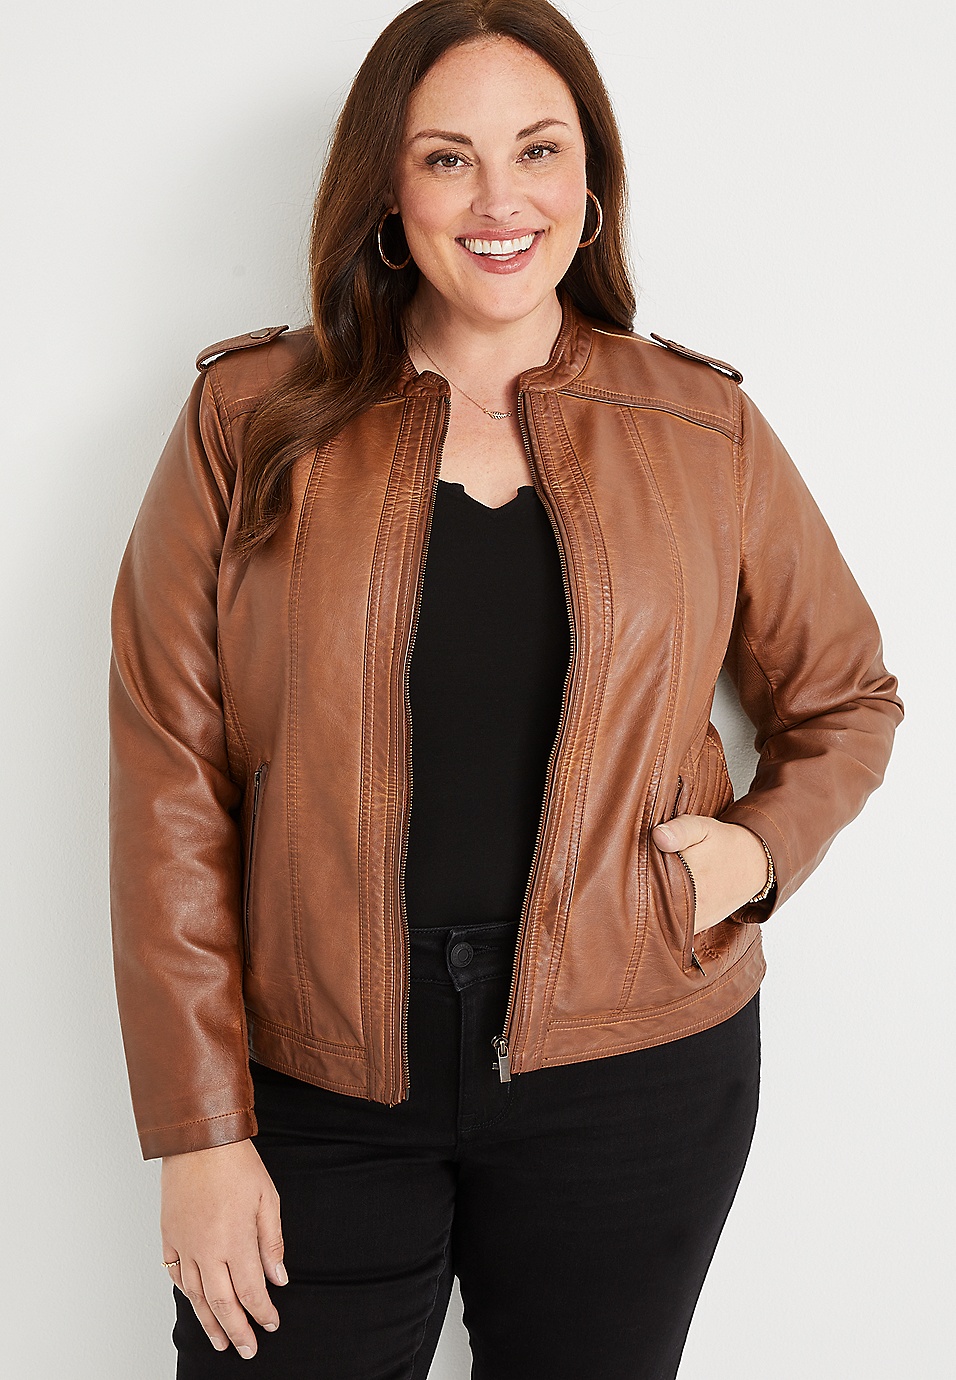 Bronze LeatherLook Jacket Plus Size Ladies Clothing from Tempted